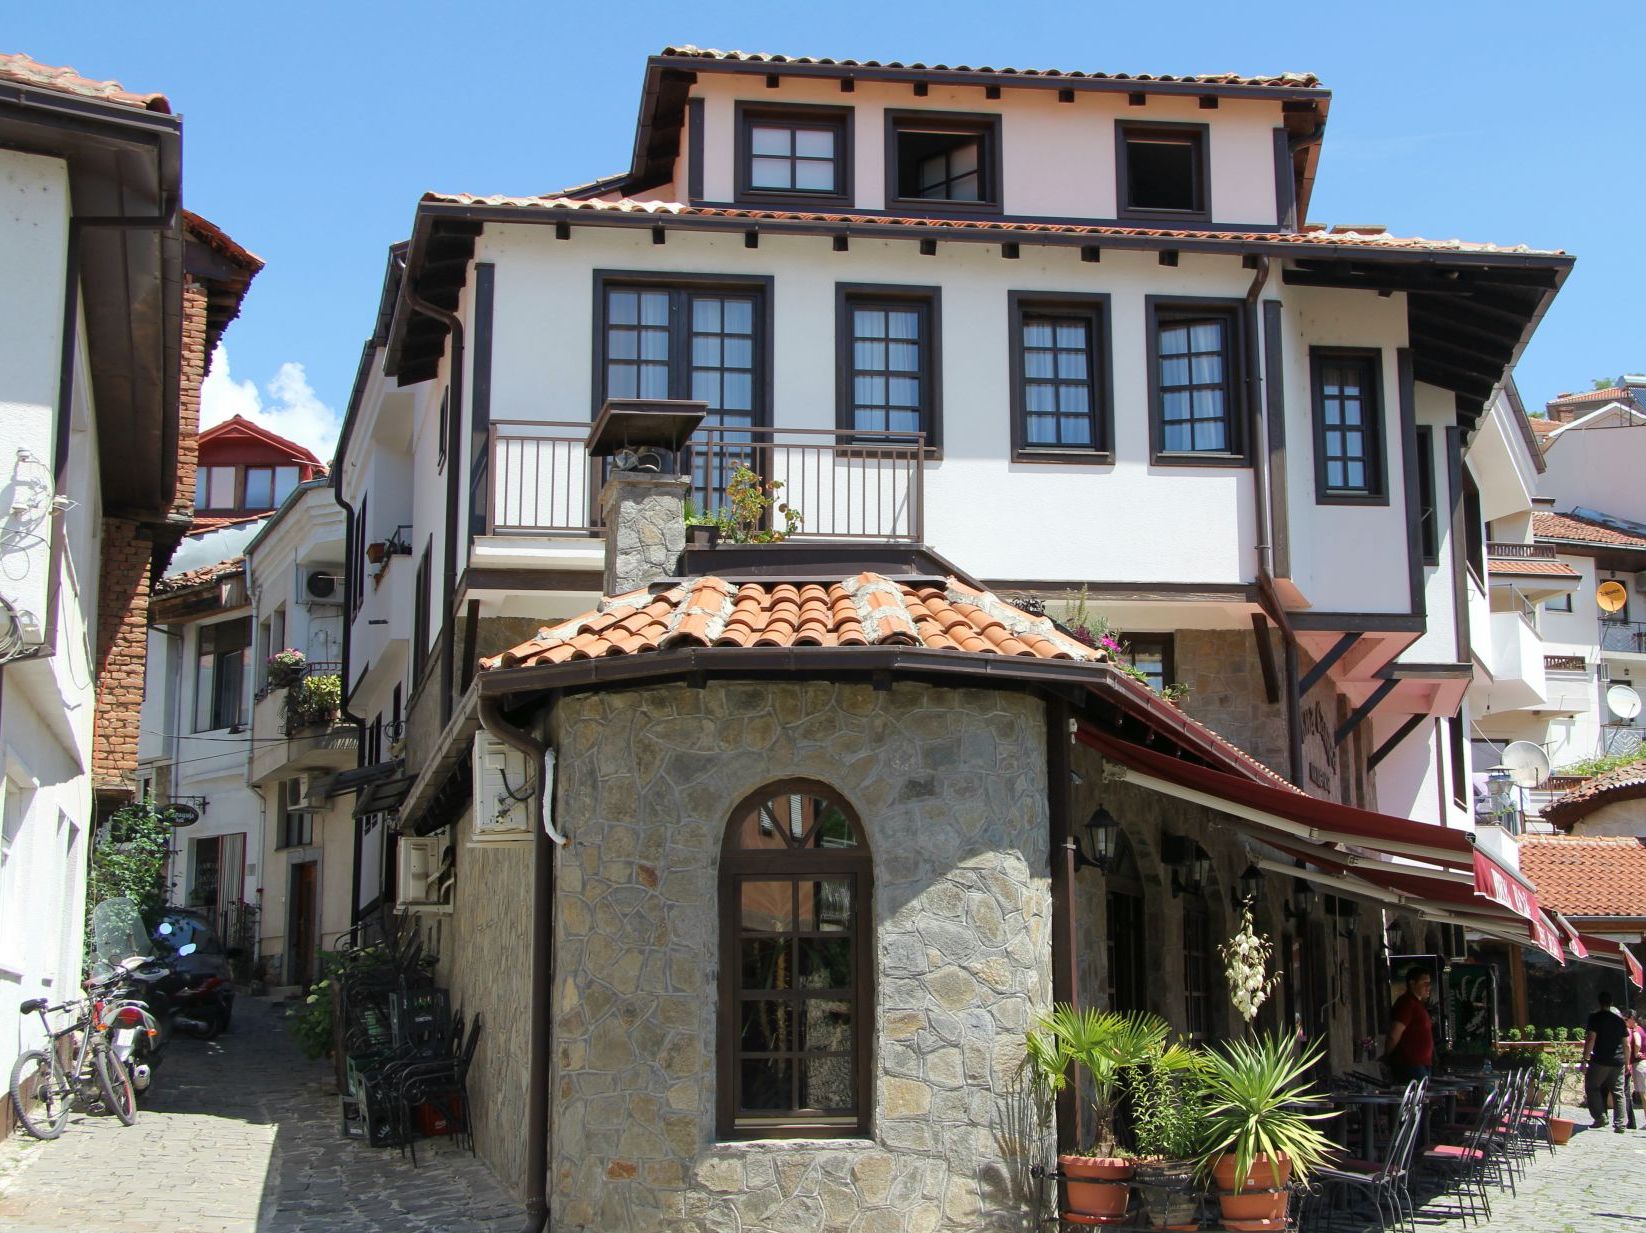 Day 5 Day tour of Ohrid